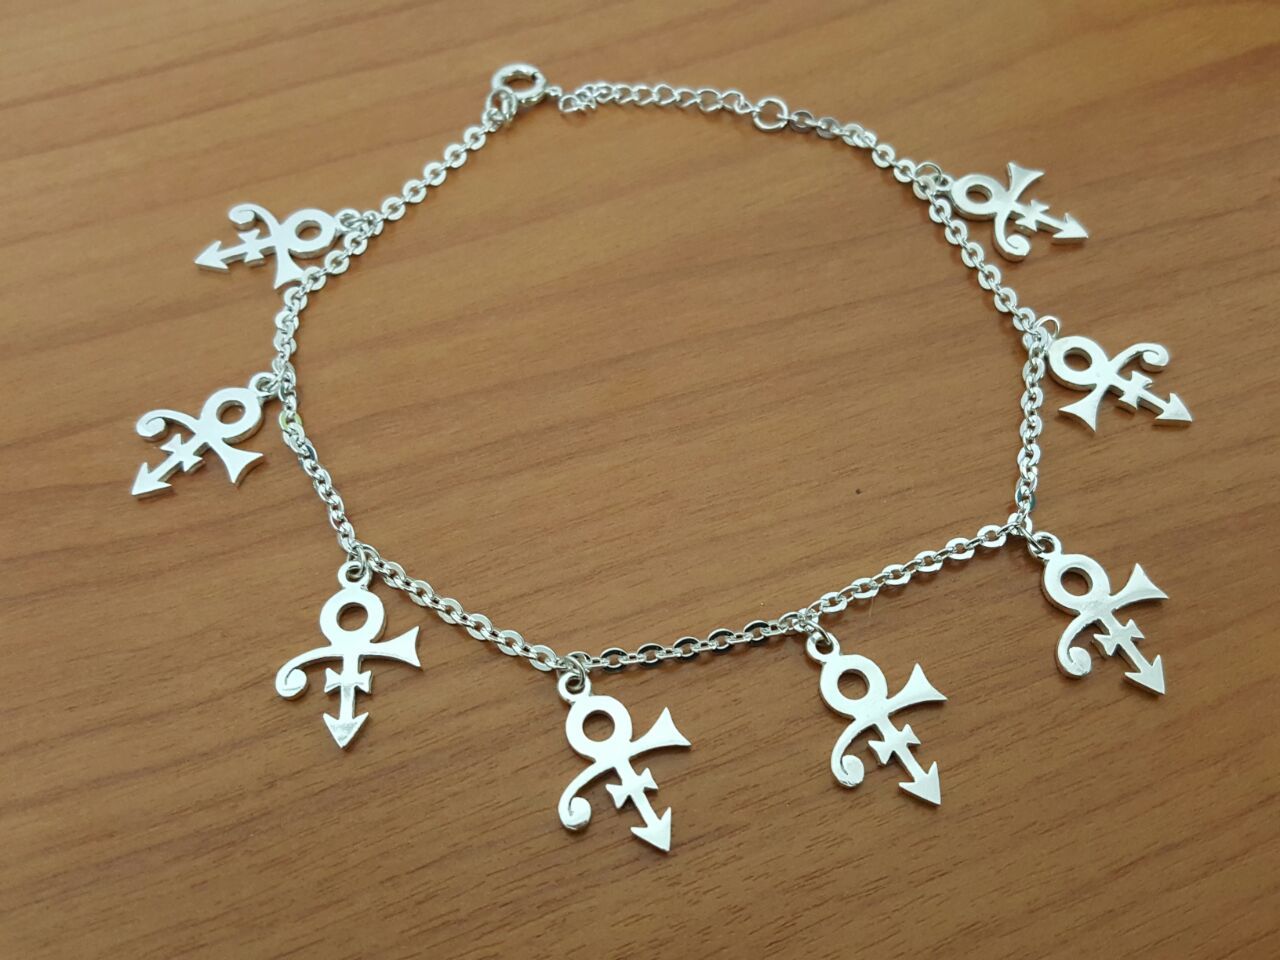 Anklet - Charms Love - Remembrance Symbols - 925 Silver - Handmade